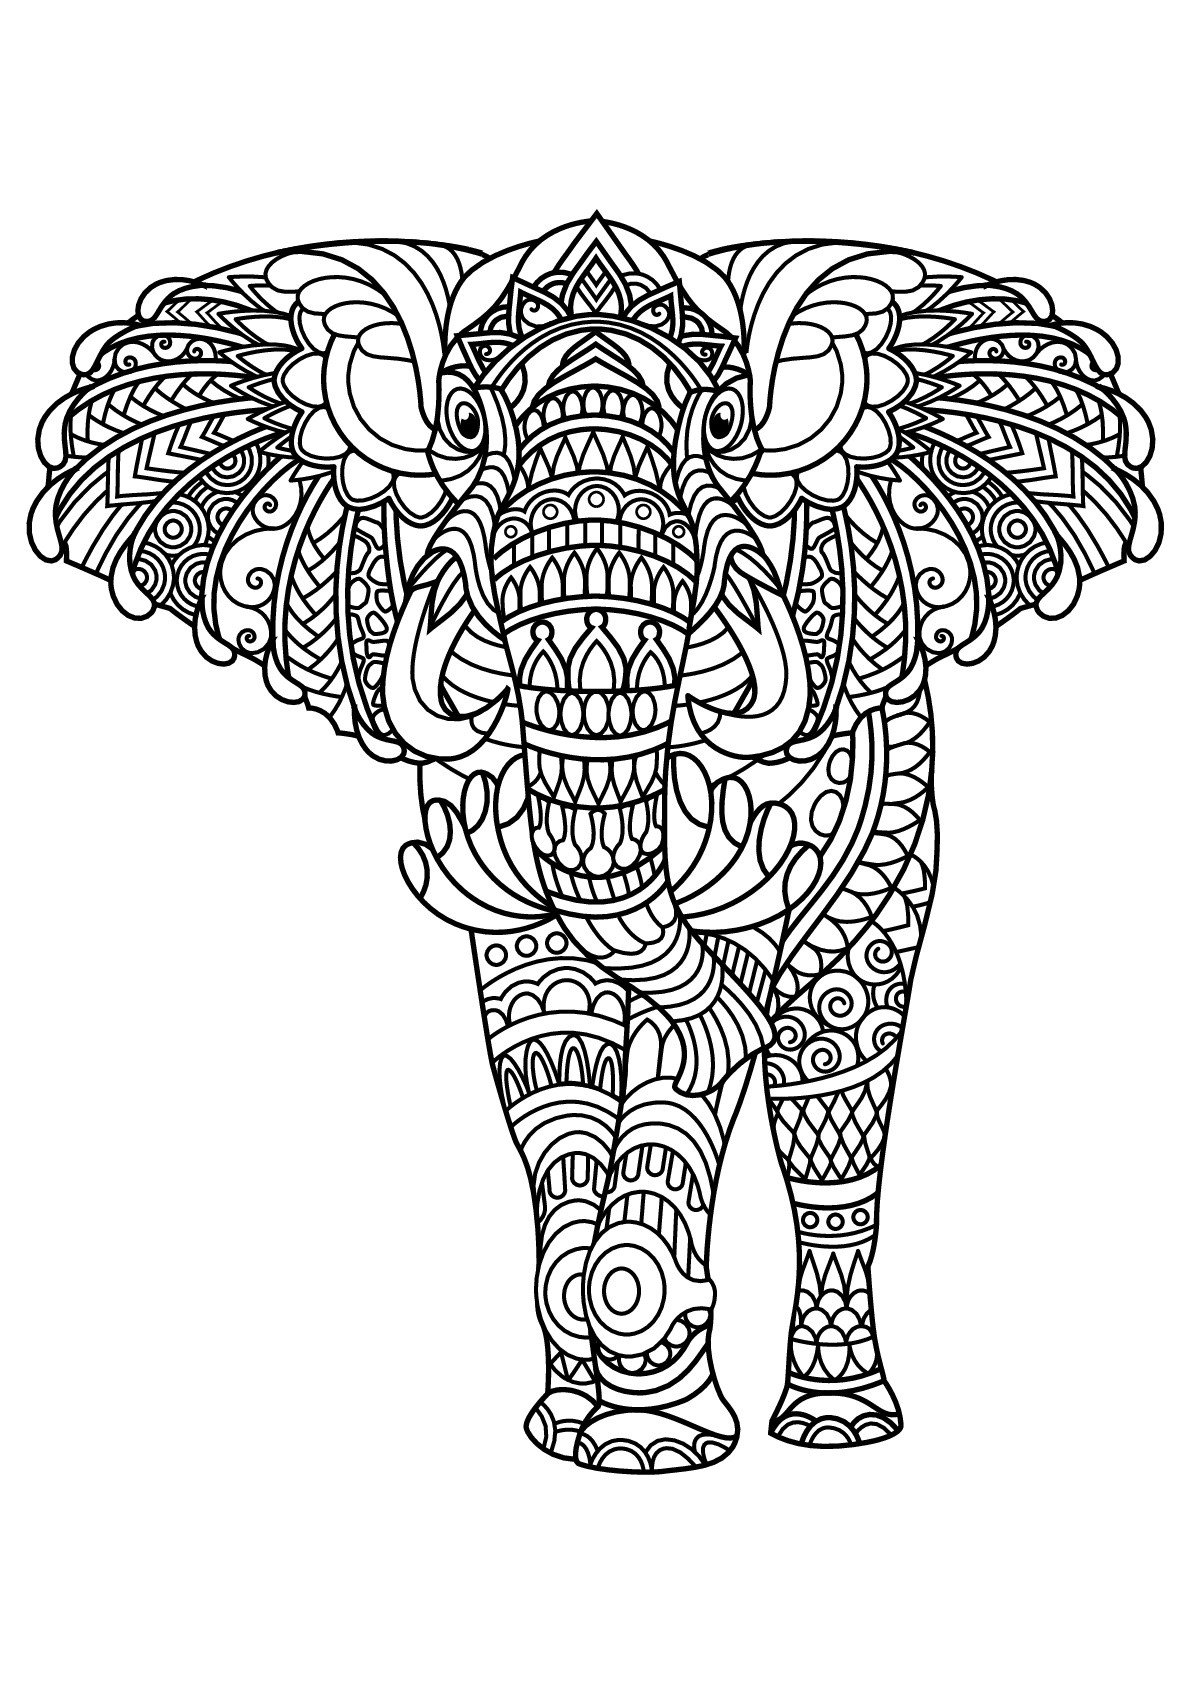 Printable Animal Coloring Pages For Adults
 Free book elephant Elephants Adult Coloring Pages